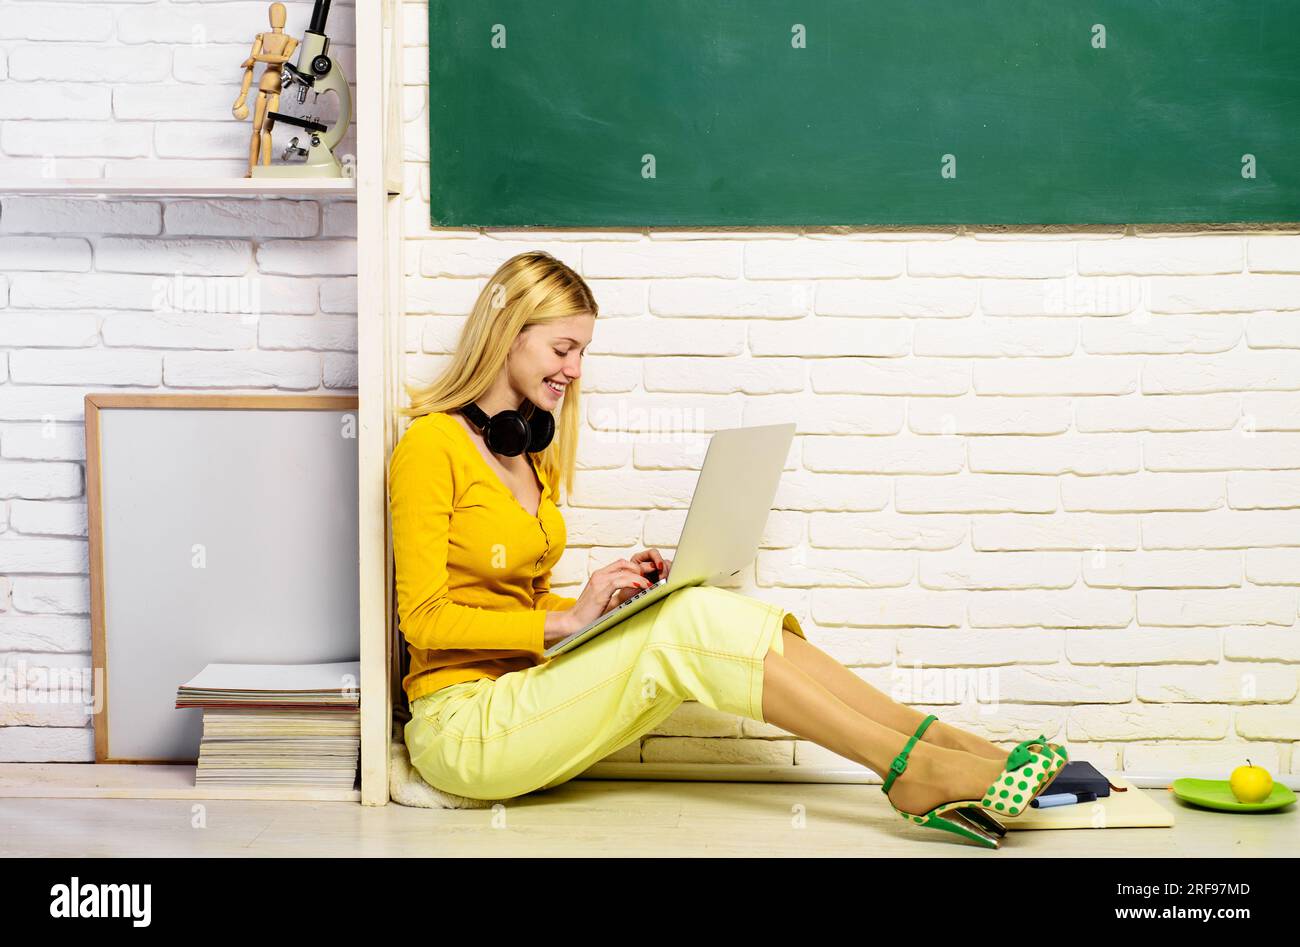 E-learning. Lesson and education in high school. Smiling student girl sitting on floor preparing for test or exam at home using laptop. Talk, internet Stock Photo